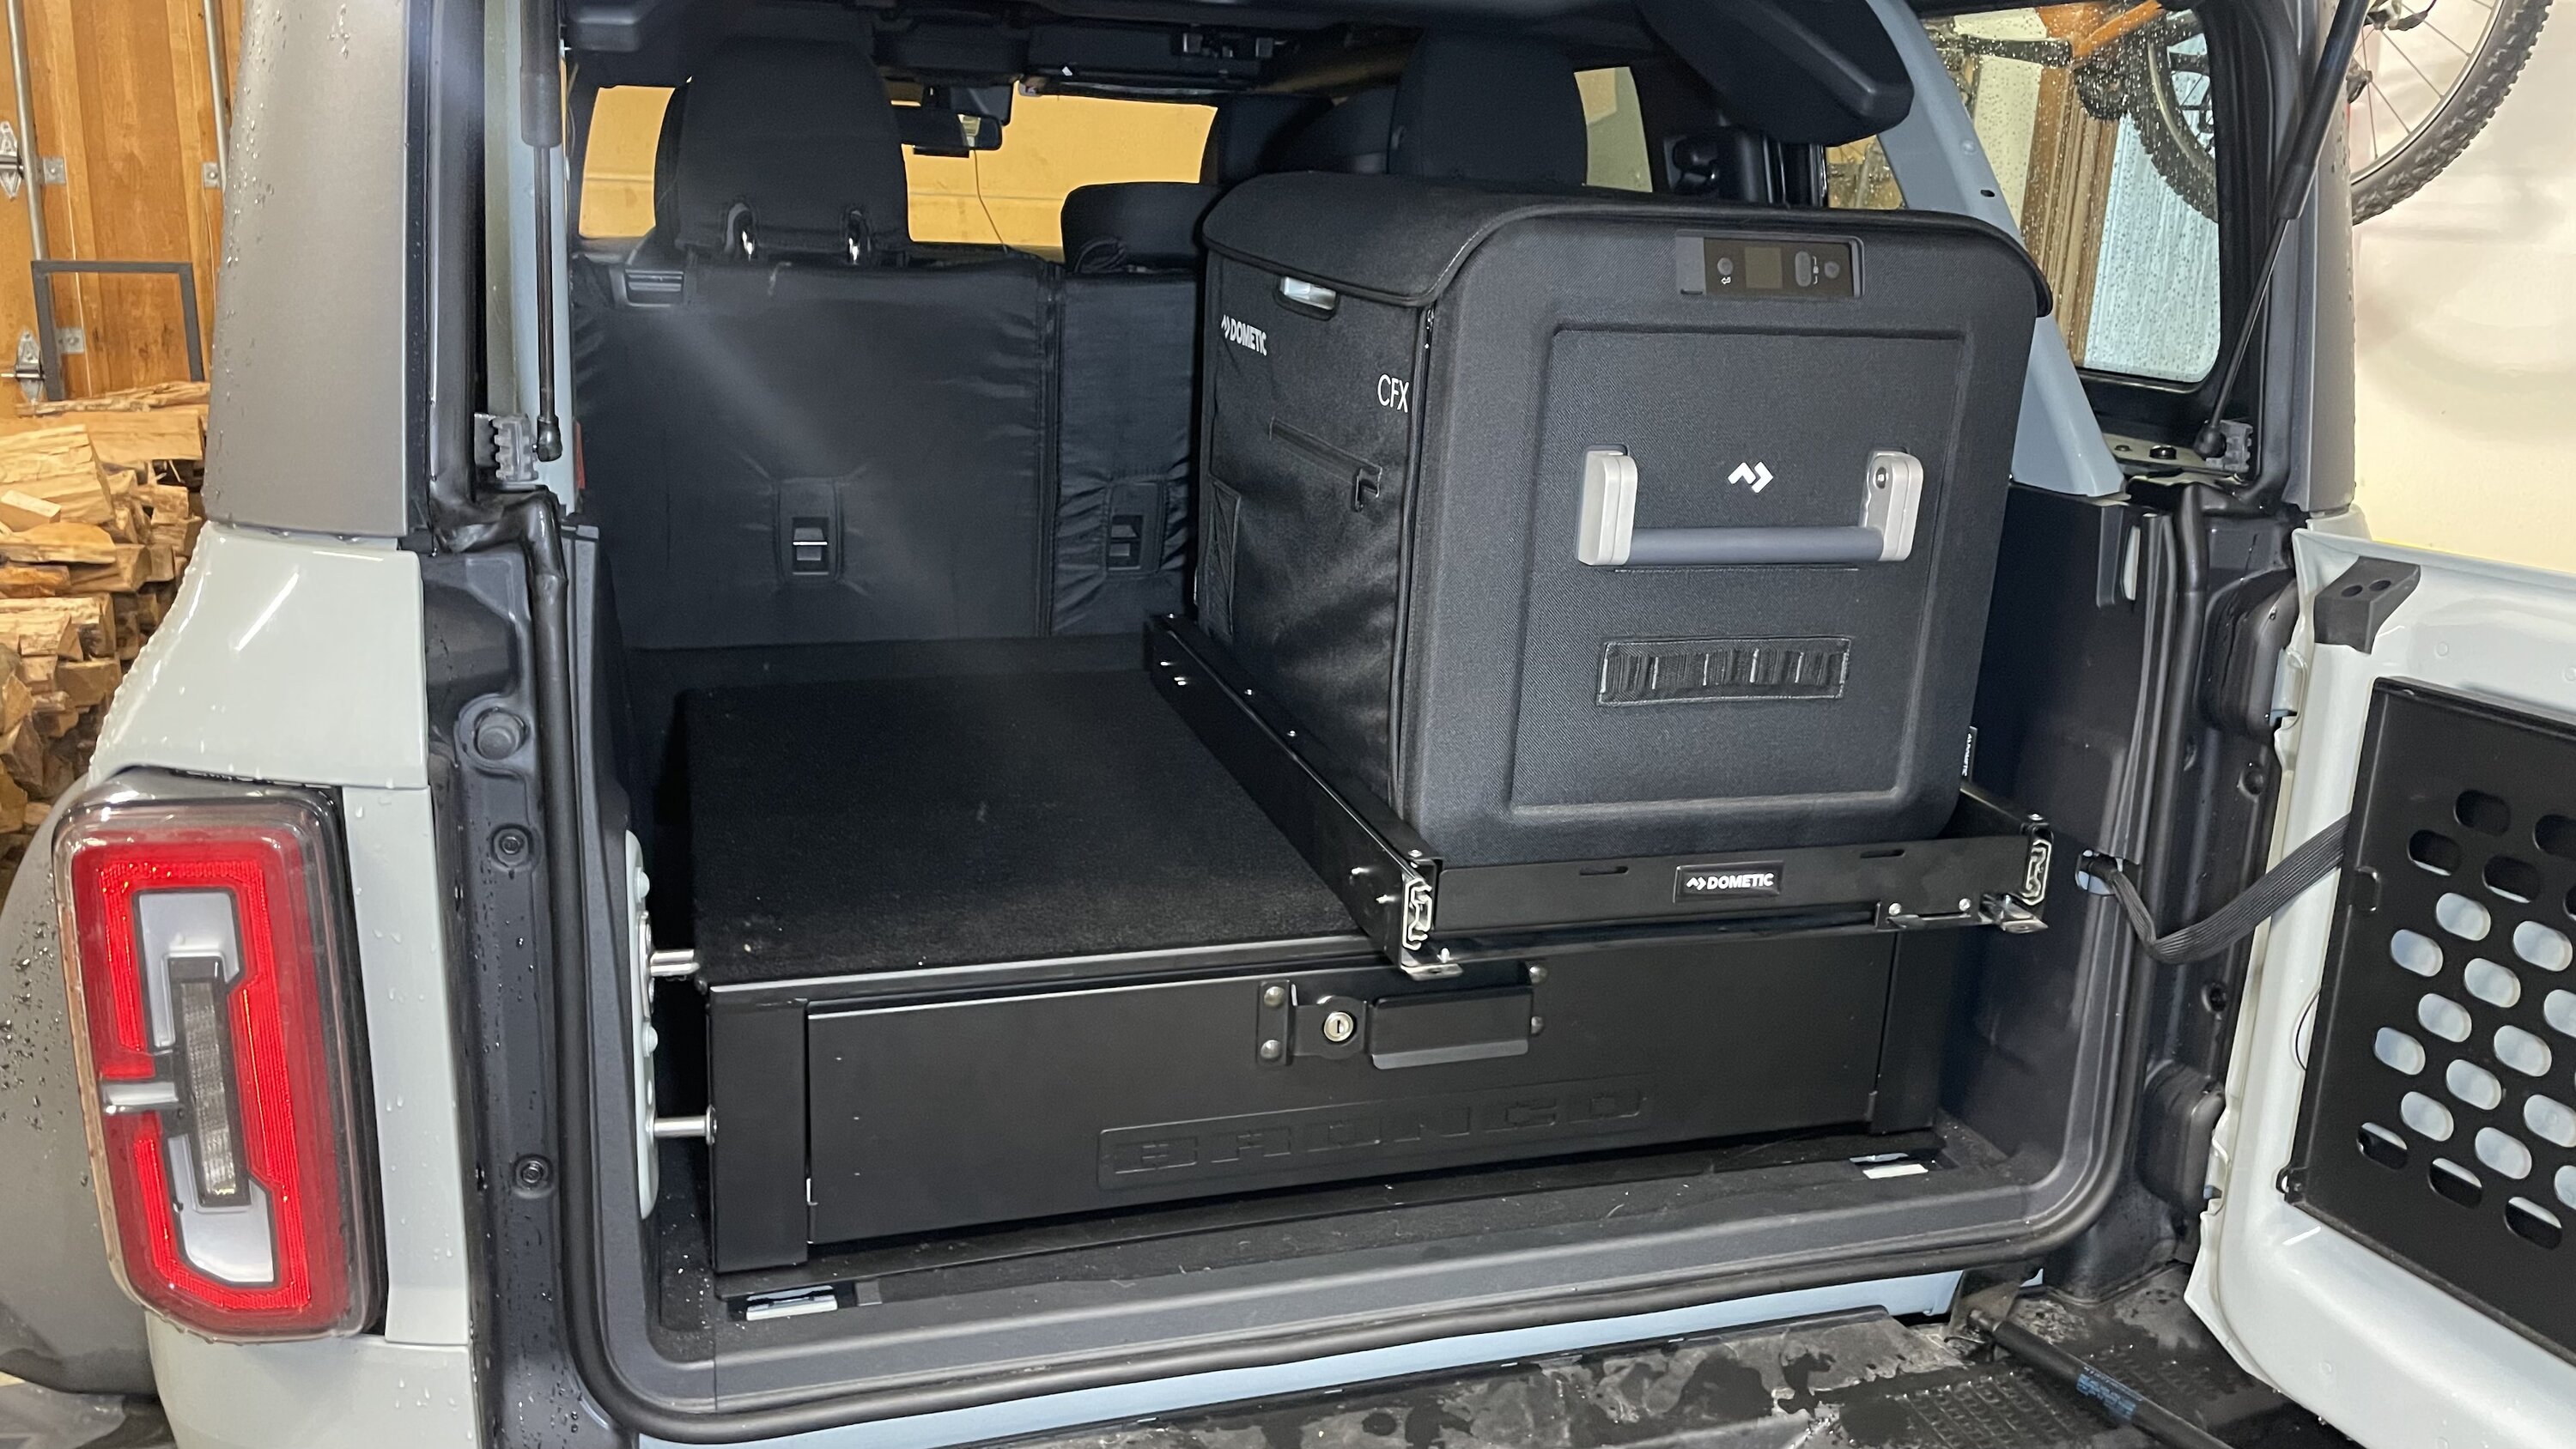 Ford Bronco Ford 4Dr Cargo Area Security Drawer + Dometic Fridge Slide $600 OBO IMG_3558